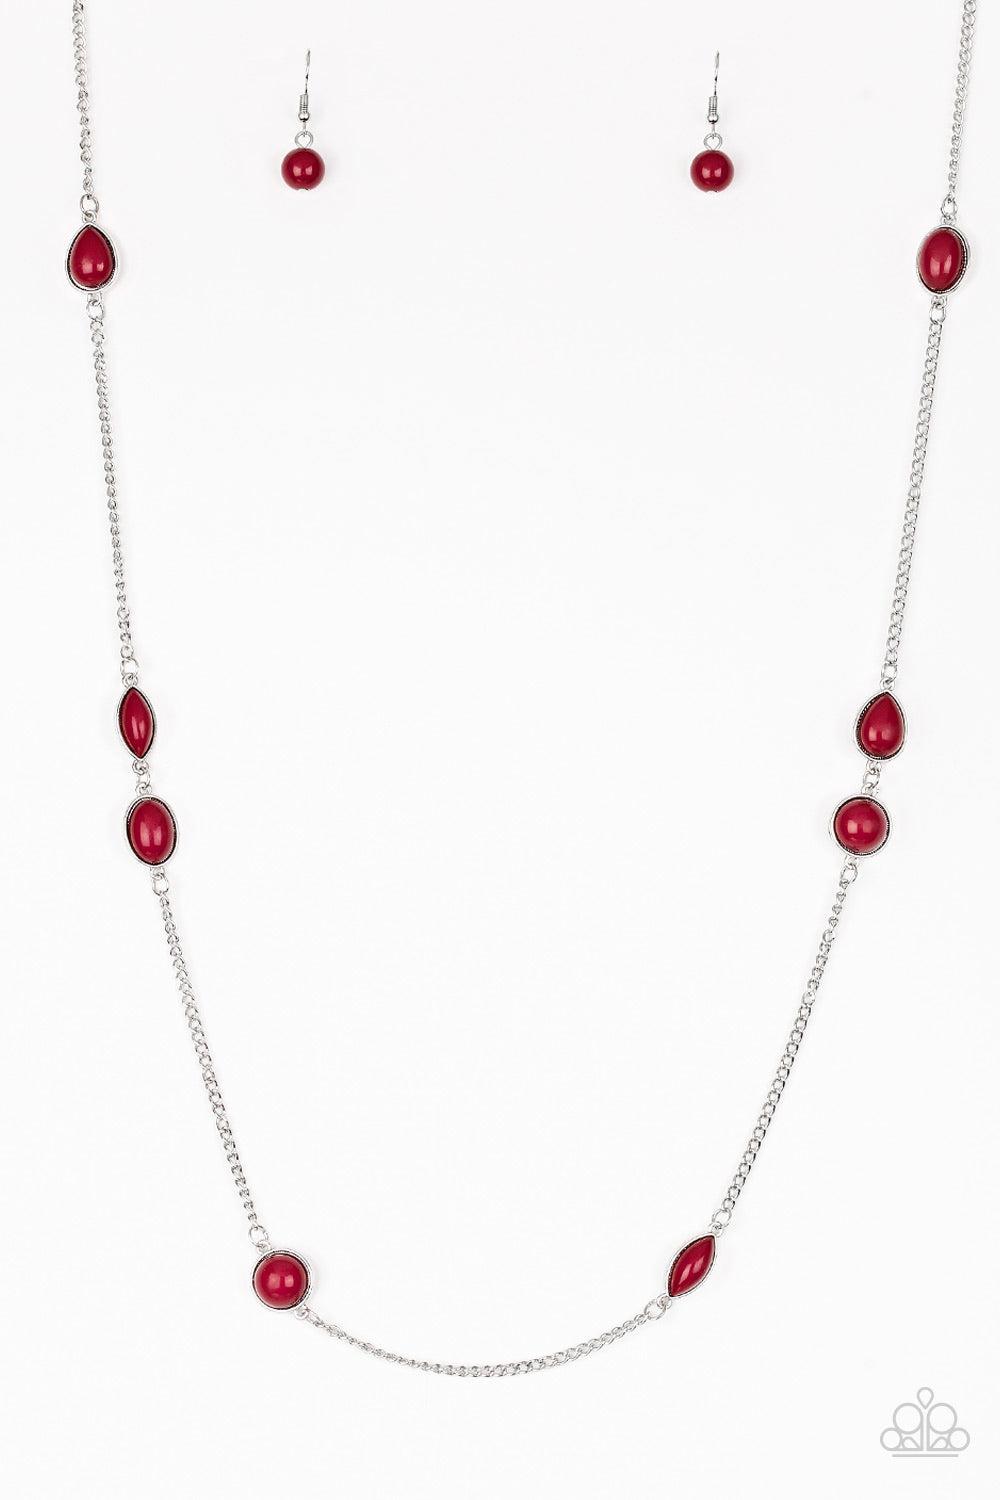 Pacific Piers Red Necklace - Paparazzi Accessories- lightbox - CarasShop.com - $5 Jewelry by Cara Jewels